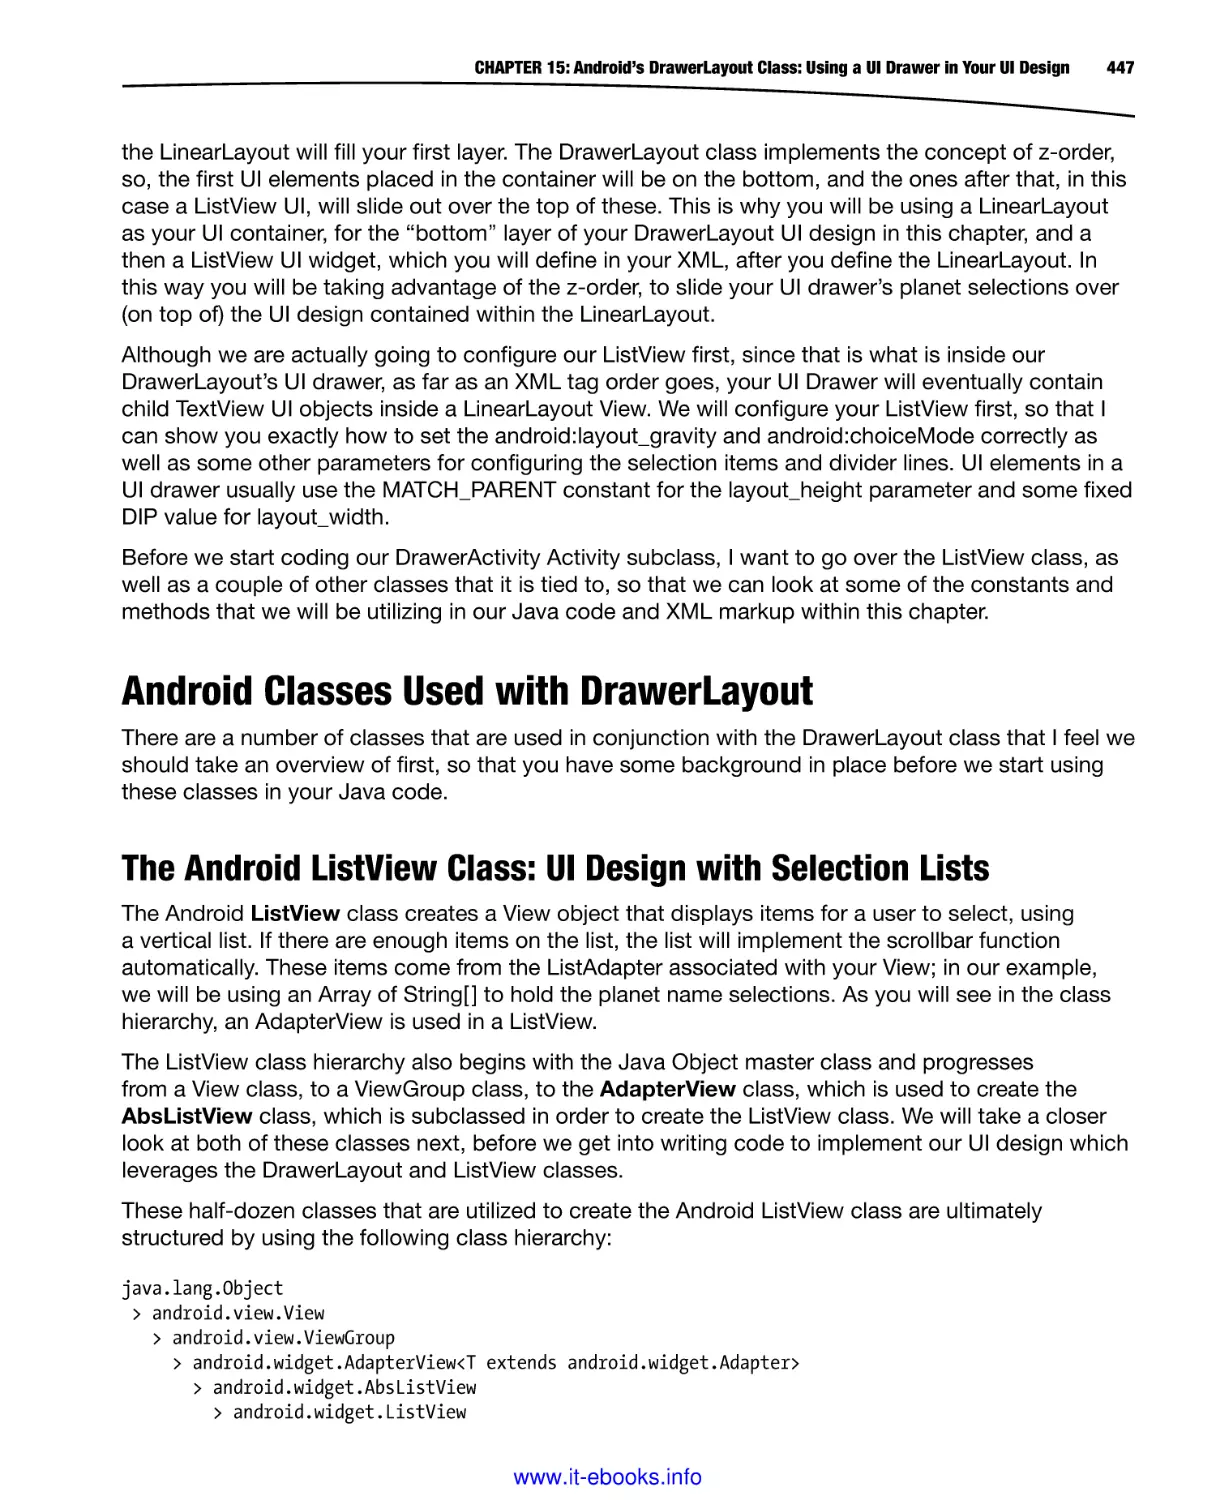 Android Classes Used with DrawerLayout
The Android ListView Class